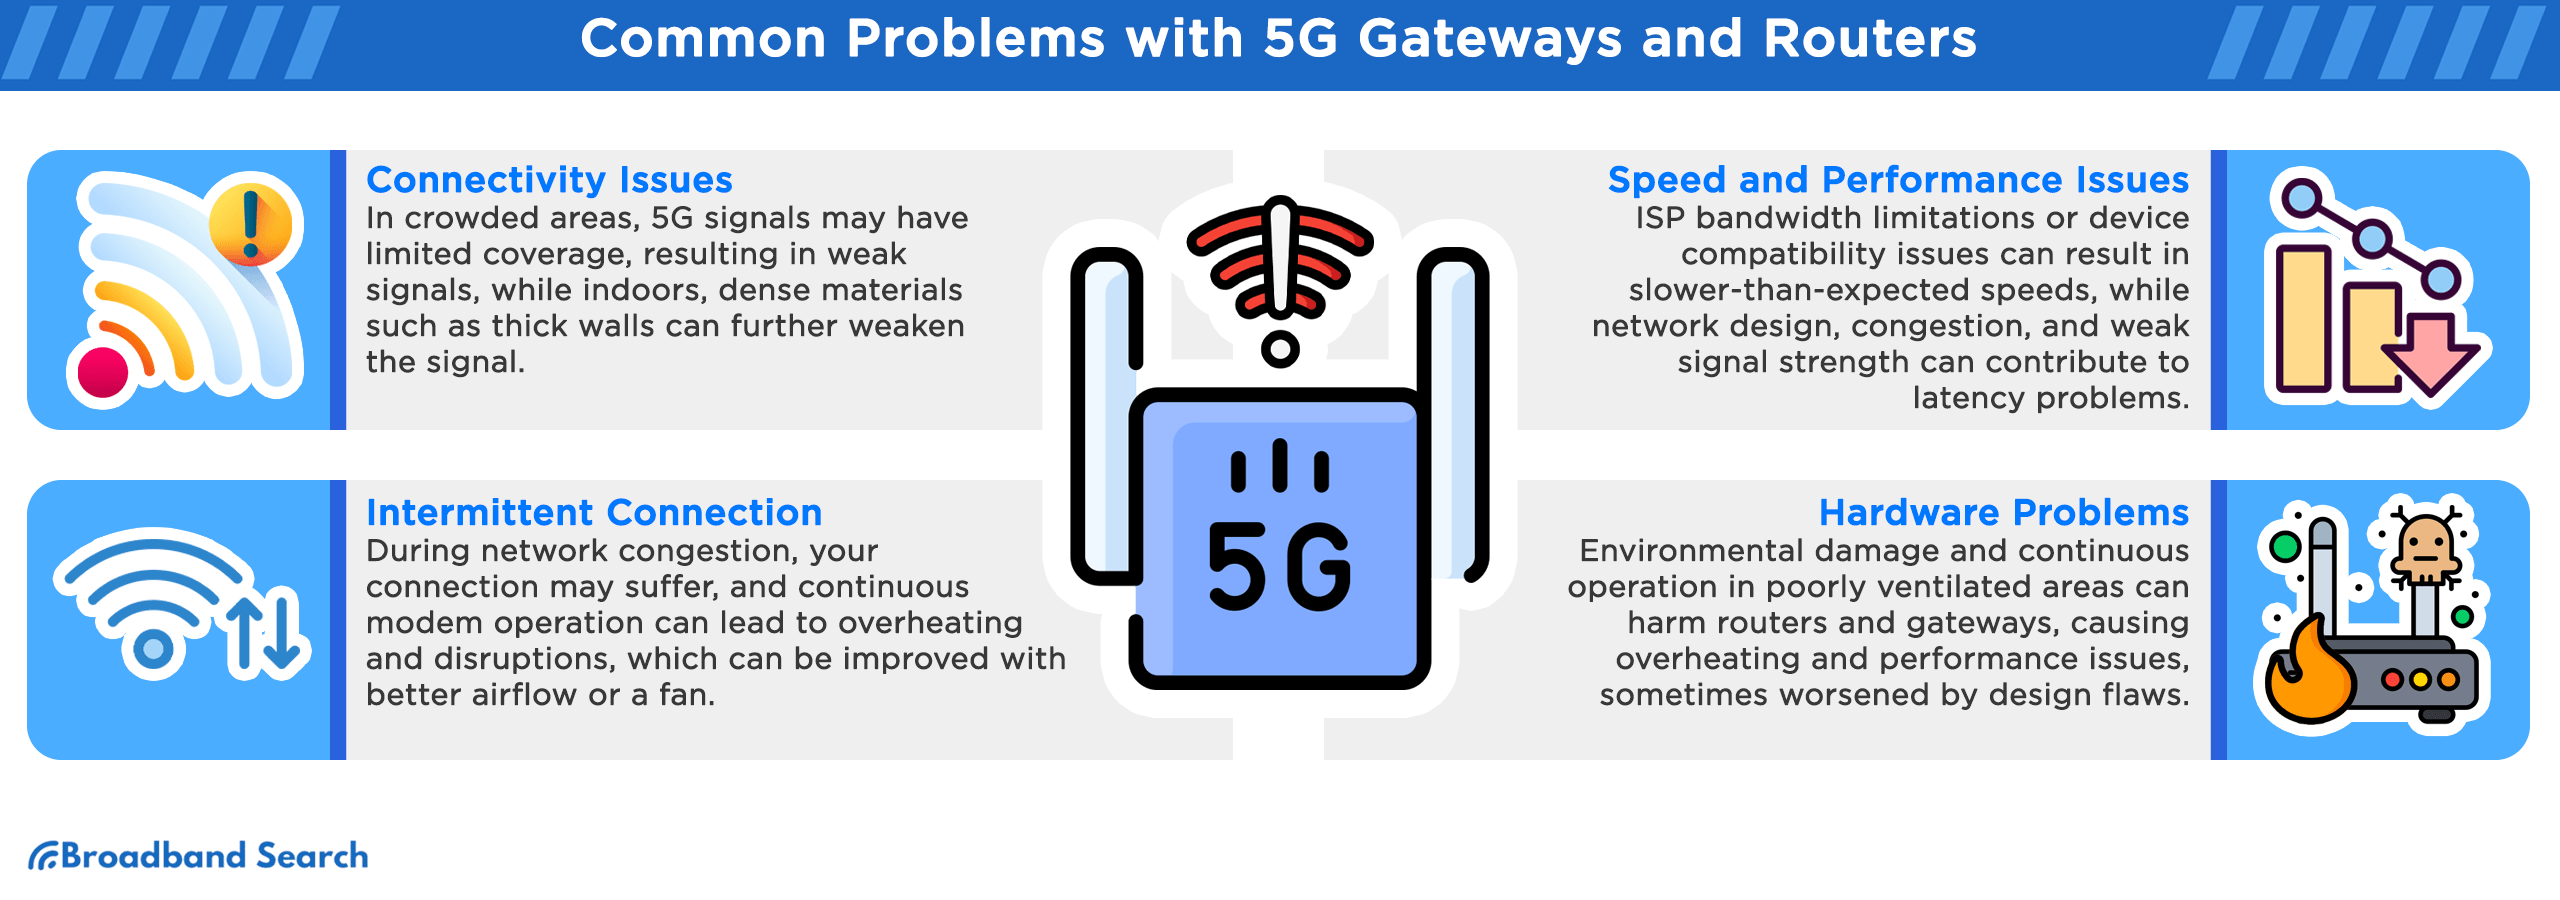 Common problems with 5G Gateways and Routers